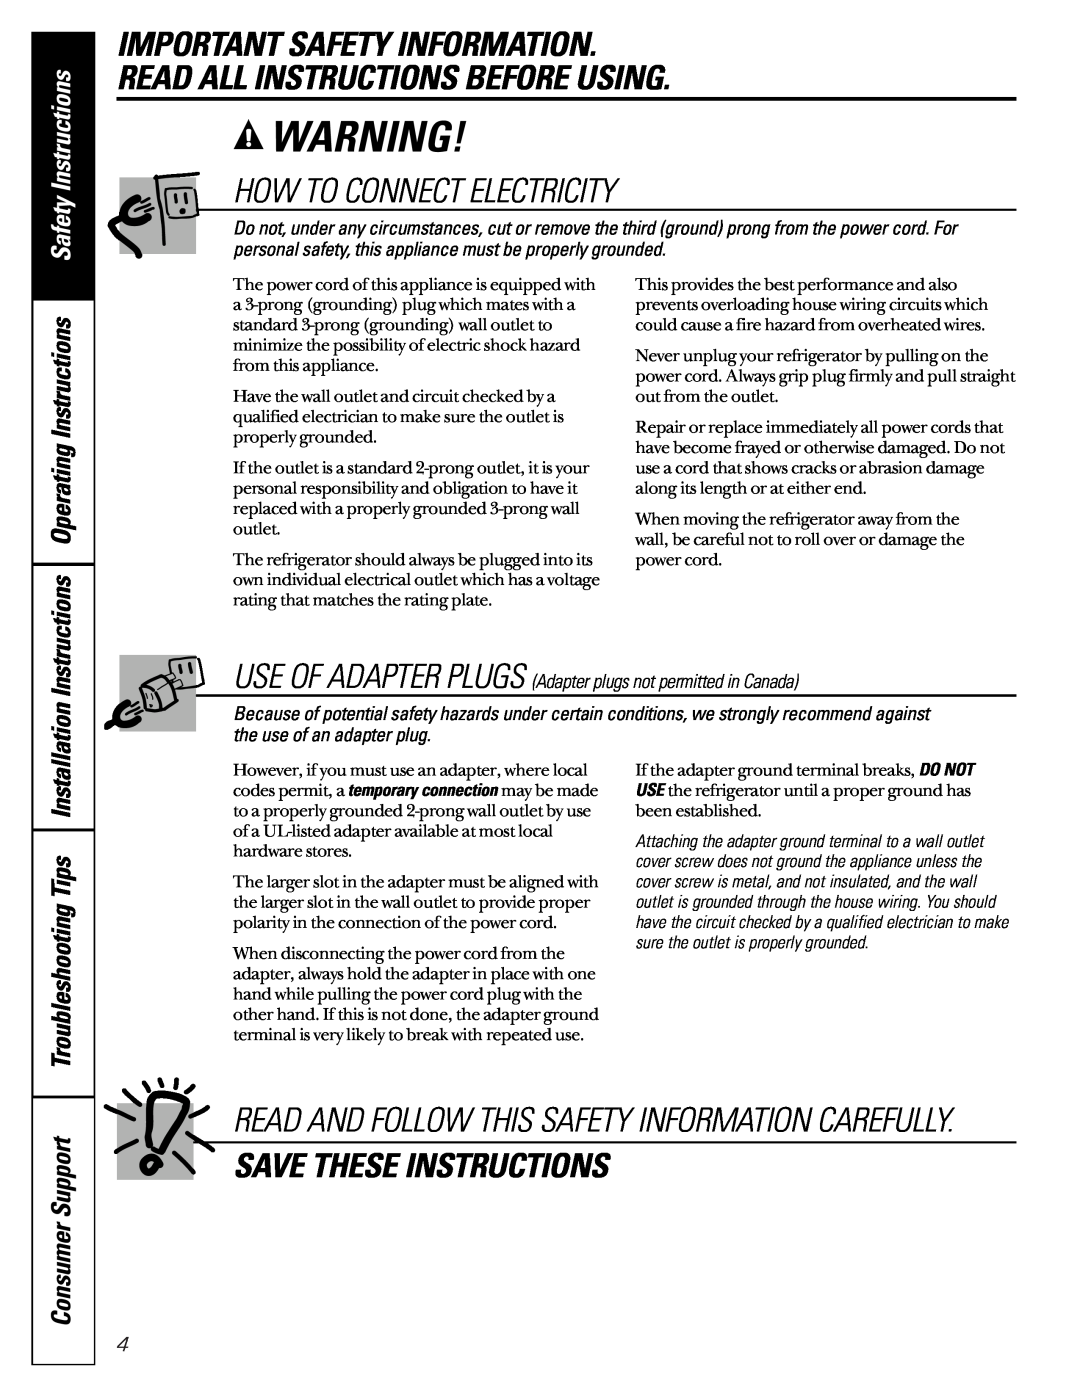 GE GMS10AAMRWW How To Connect Electricity, Save These Instructions, Consumer Support, Instructions Operating Instructions 